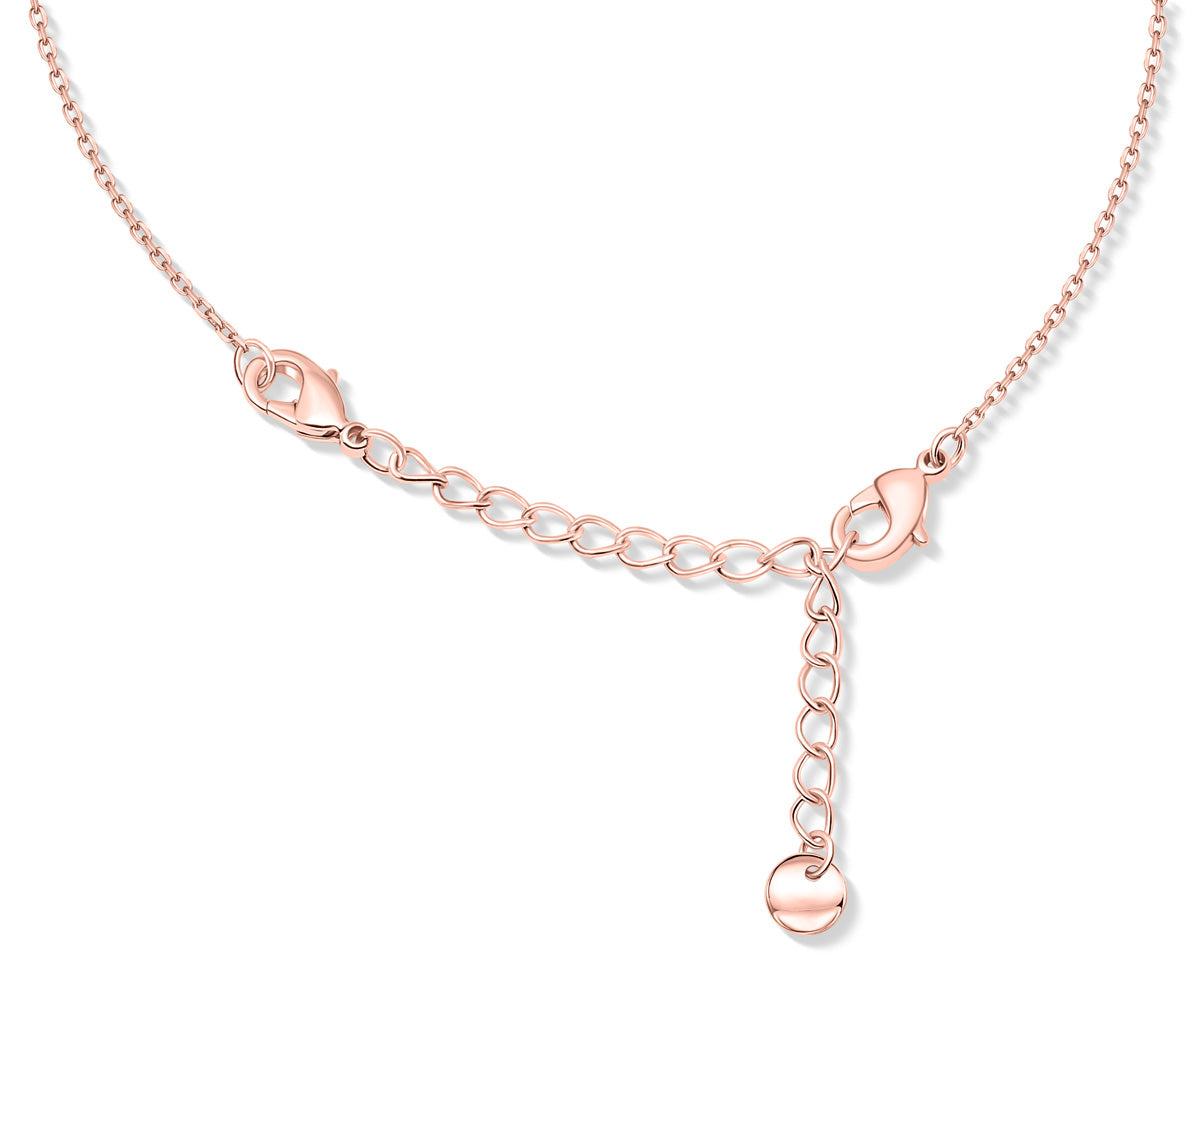 Rose gold plated necklace extension